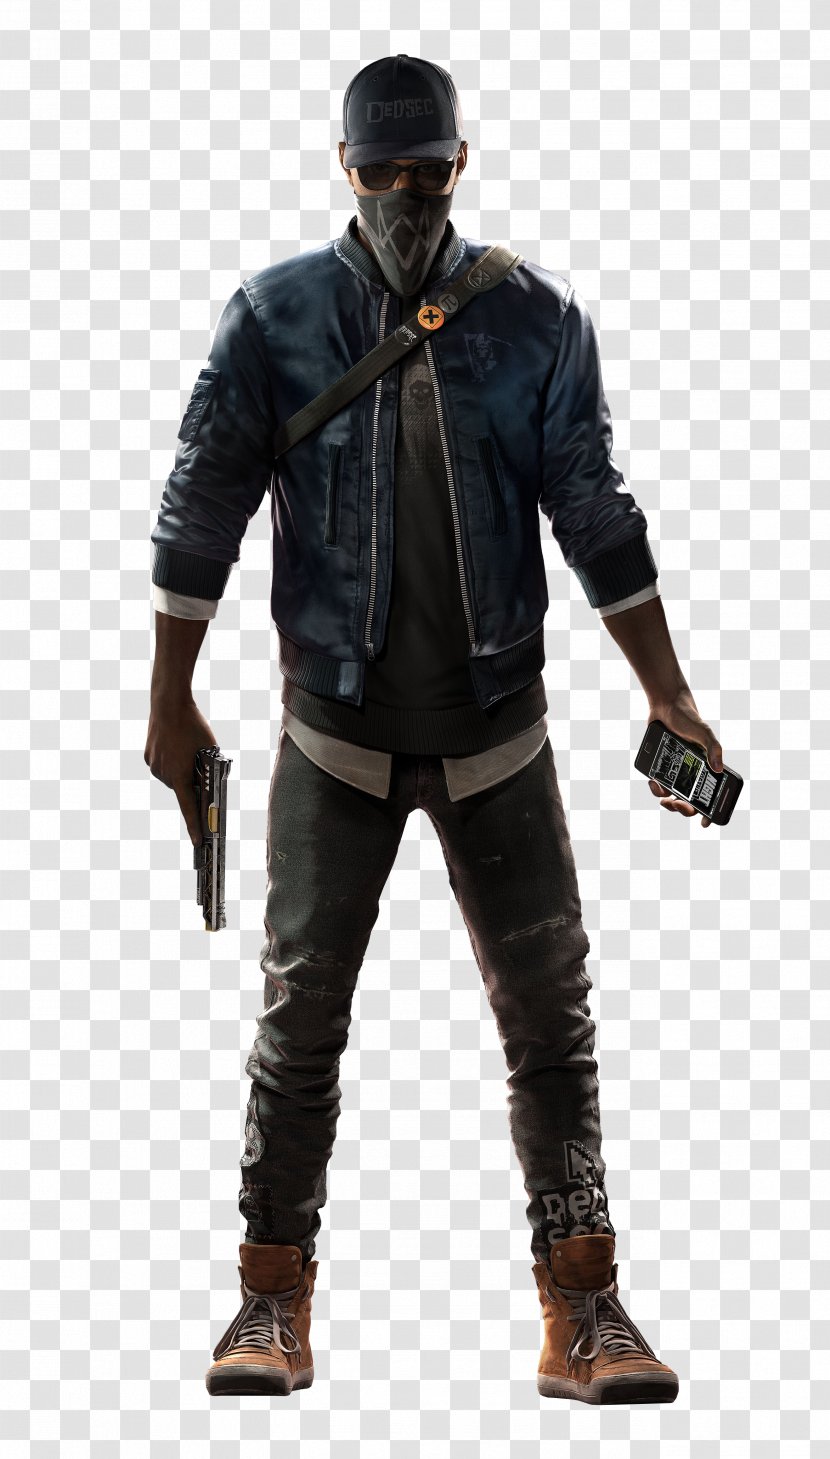 Watch Dogs 2 Flight Jacket Video Game Transparent PNG